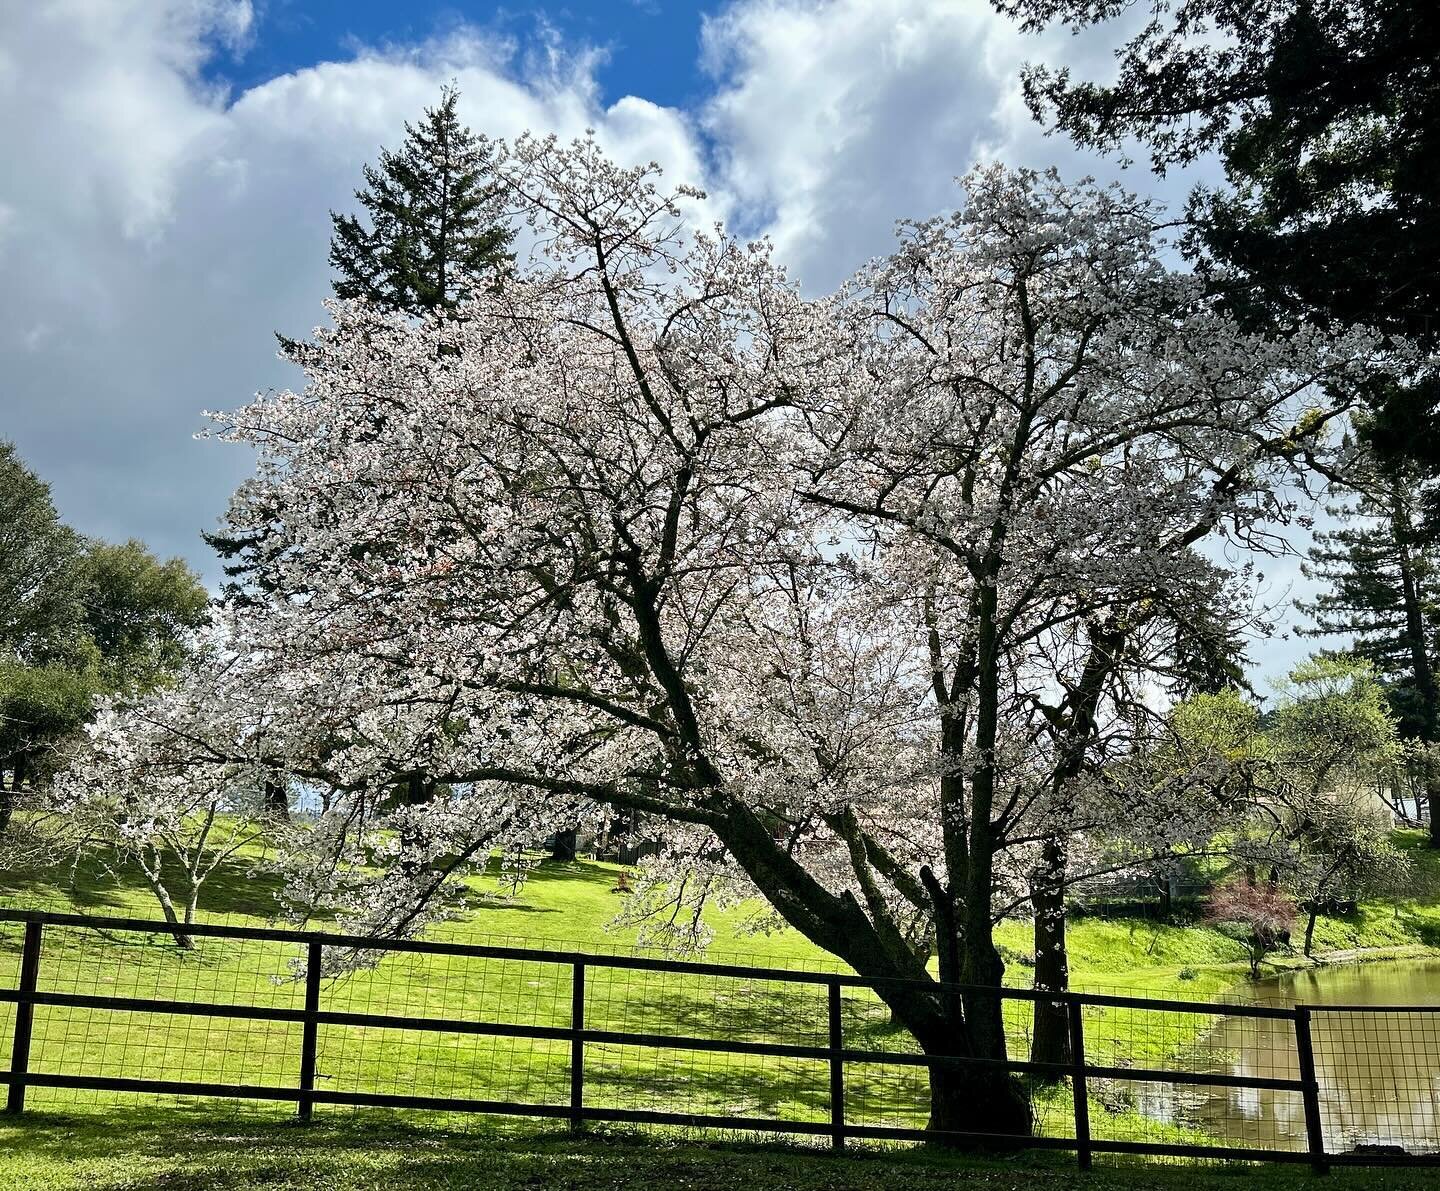 Spring is springing, sunny warm, rainy windy, clouds and bright blue sky. It&rsquo;s got all the drama, including blossoms on the trees&hellip; #springsprung #plumblossoms 
@evergreentaiji @sallychangtaiji